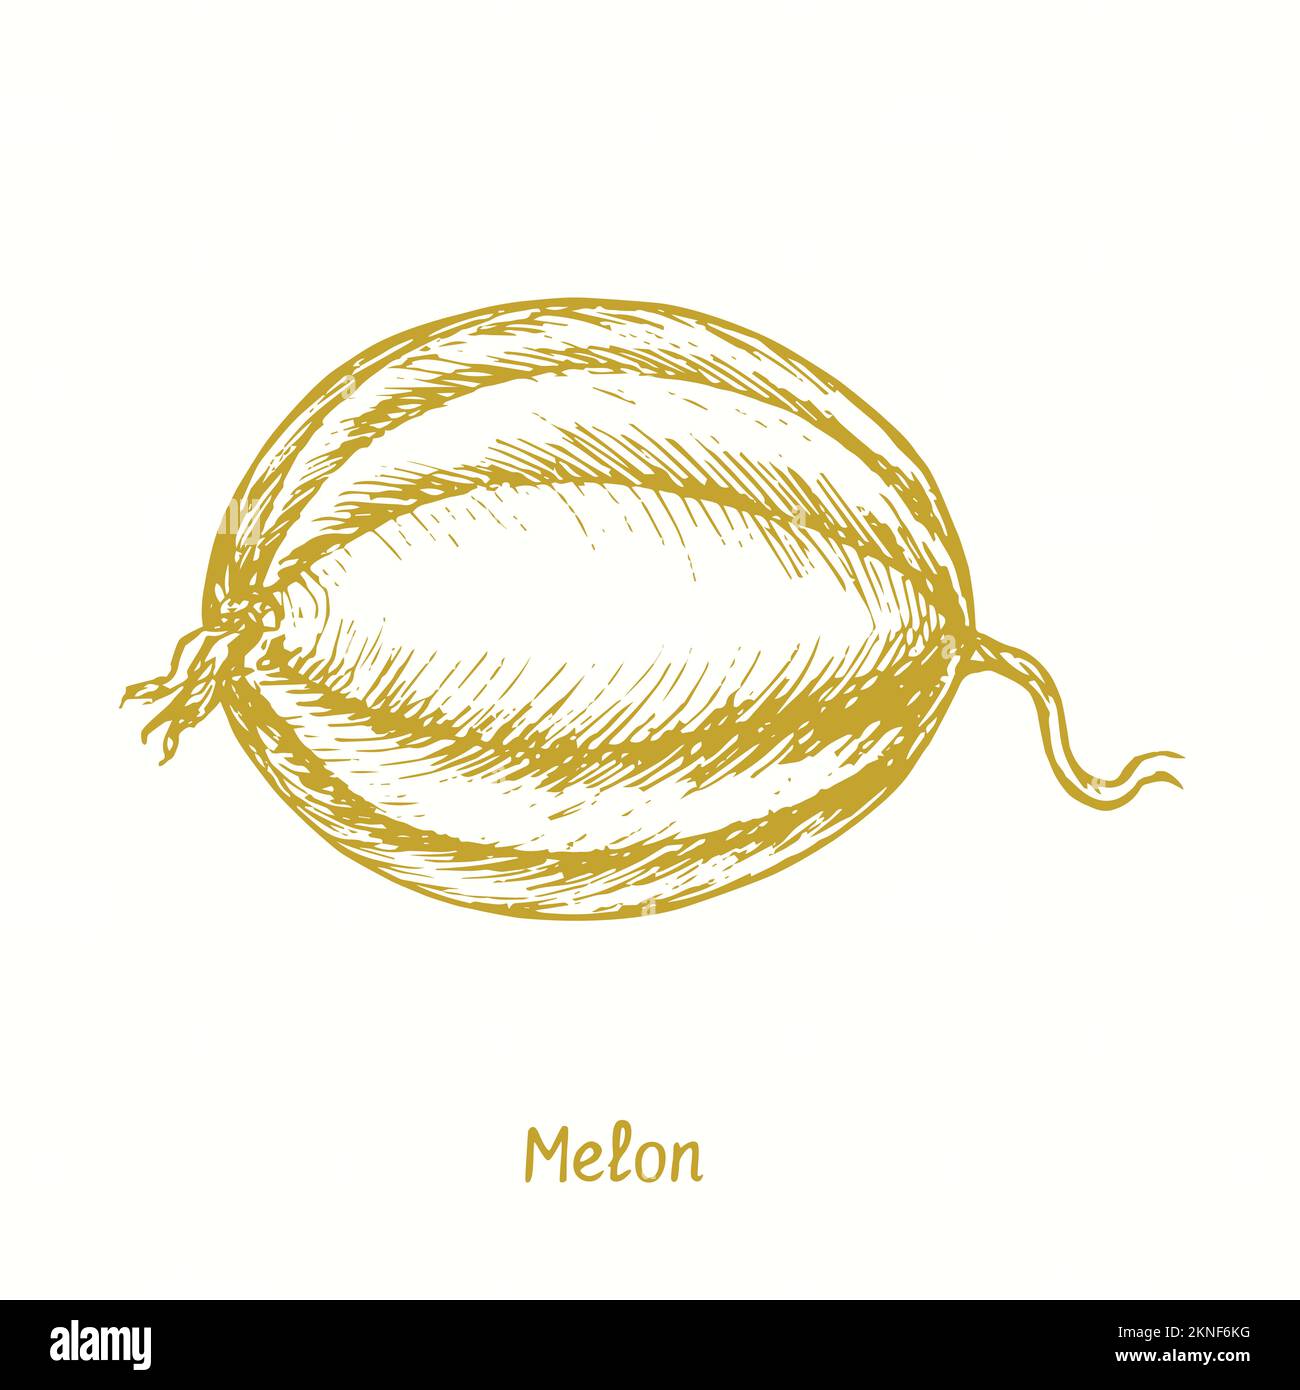 Melon ( Cucurbitaceae ) fruit. Ink yelow doodle drawing in woodcut style Stock Photo